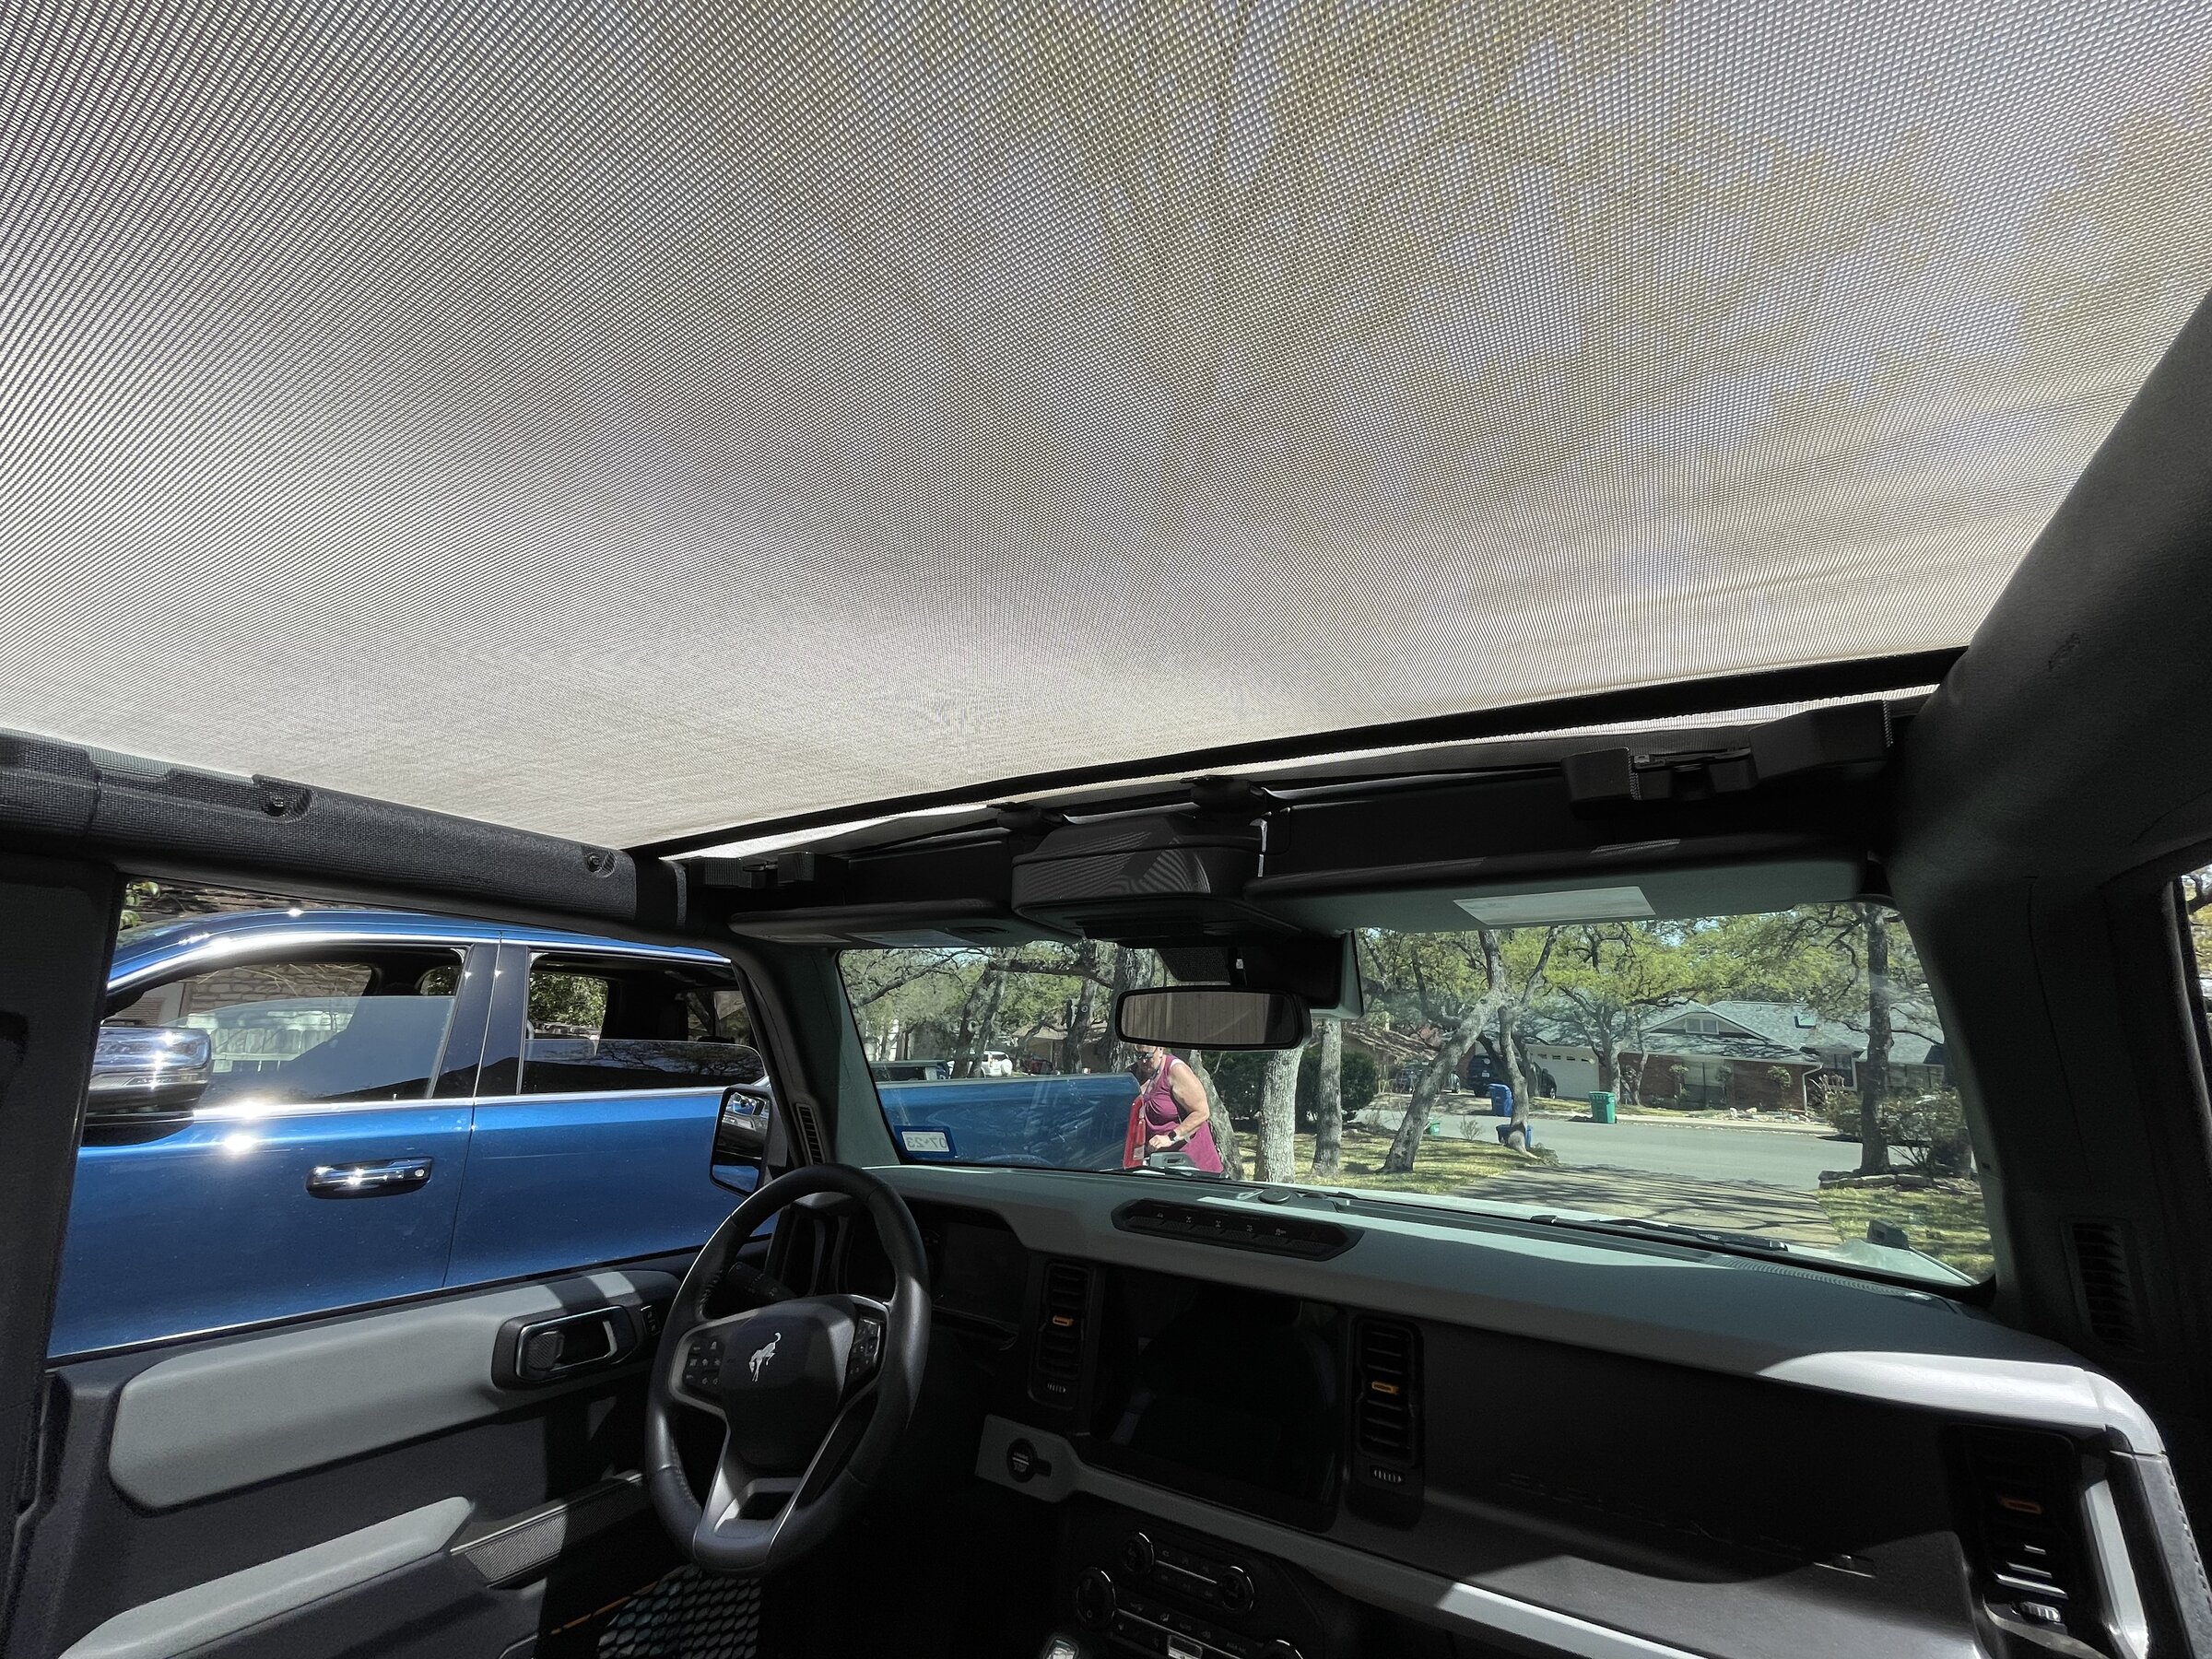 Ford Bronco 2 Door Mesh shade by JTopsusa - first look 216F56D2-8591-4454-B5C4-A27A0AEEEA0F